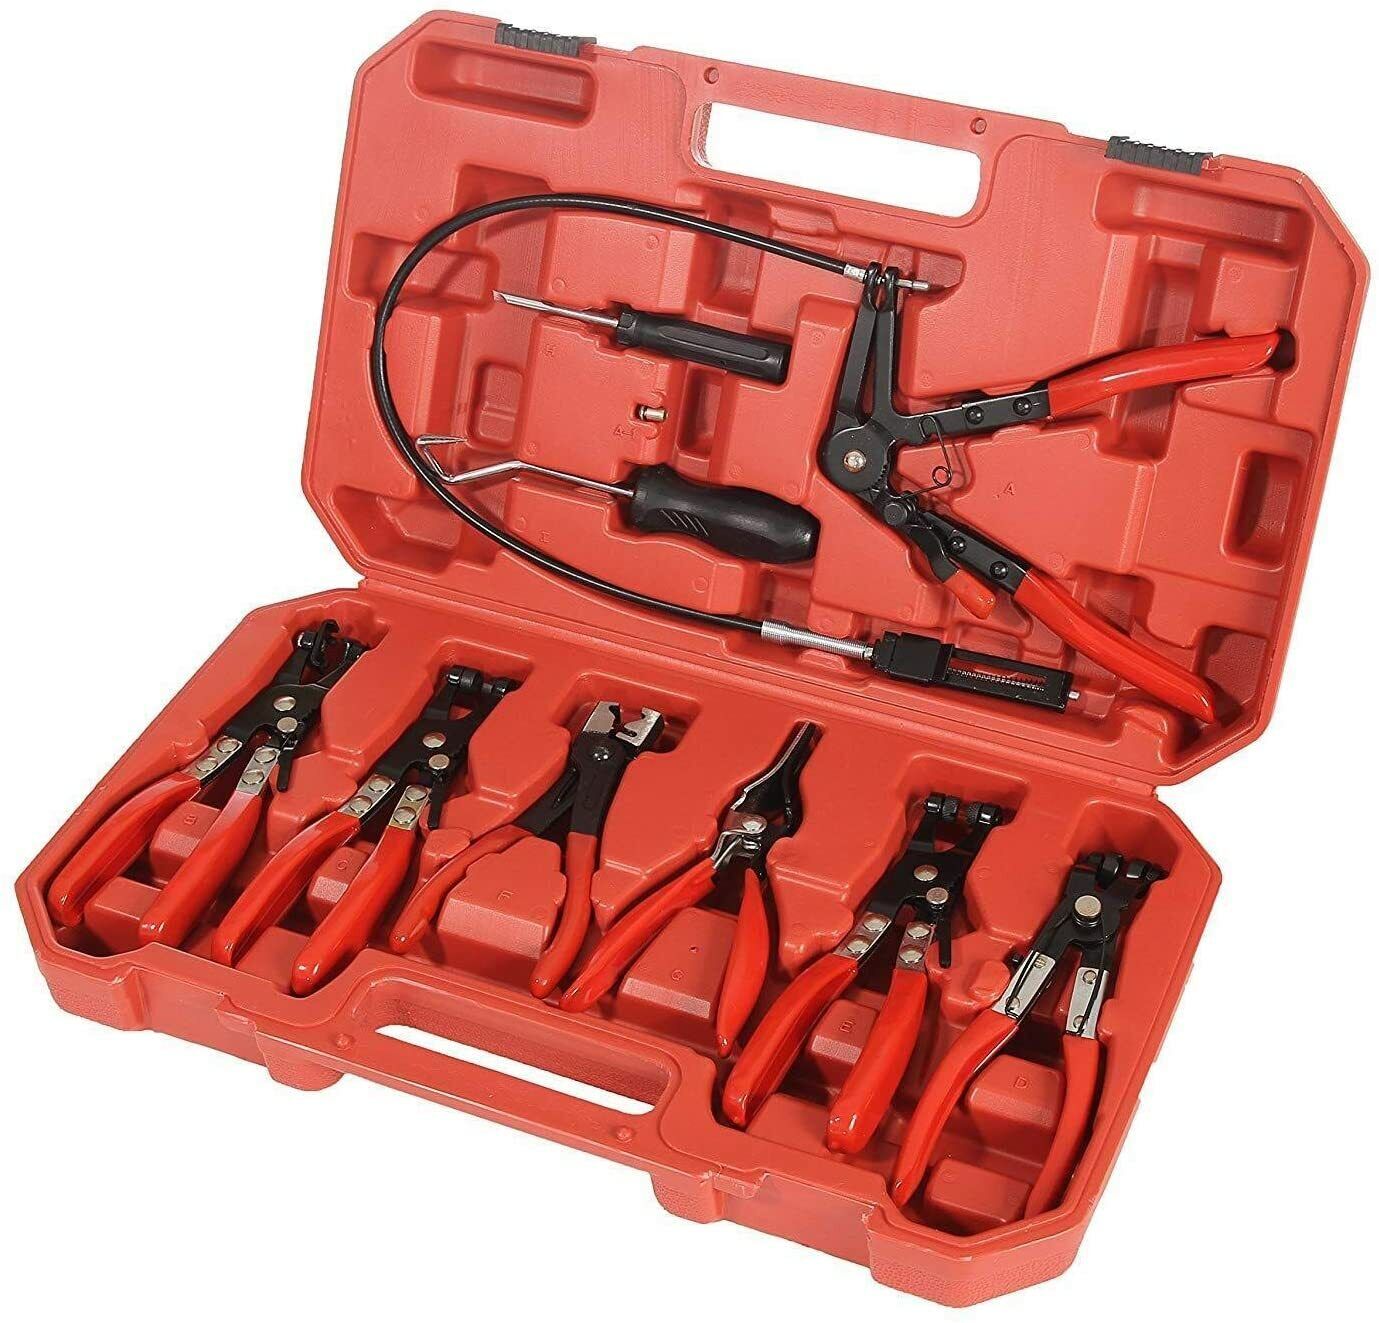 Comprehensive 9-Piece Hose Clamp Pliers Kit - Includes Swivel Jaw, Flat Band, Angled Pliers, and Additional Tools for Automotive Repair